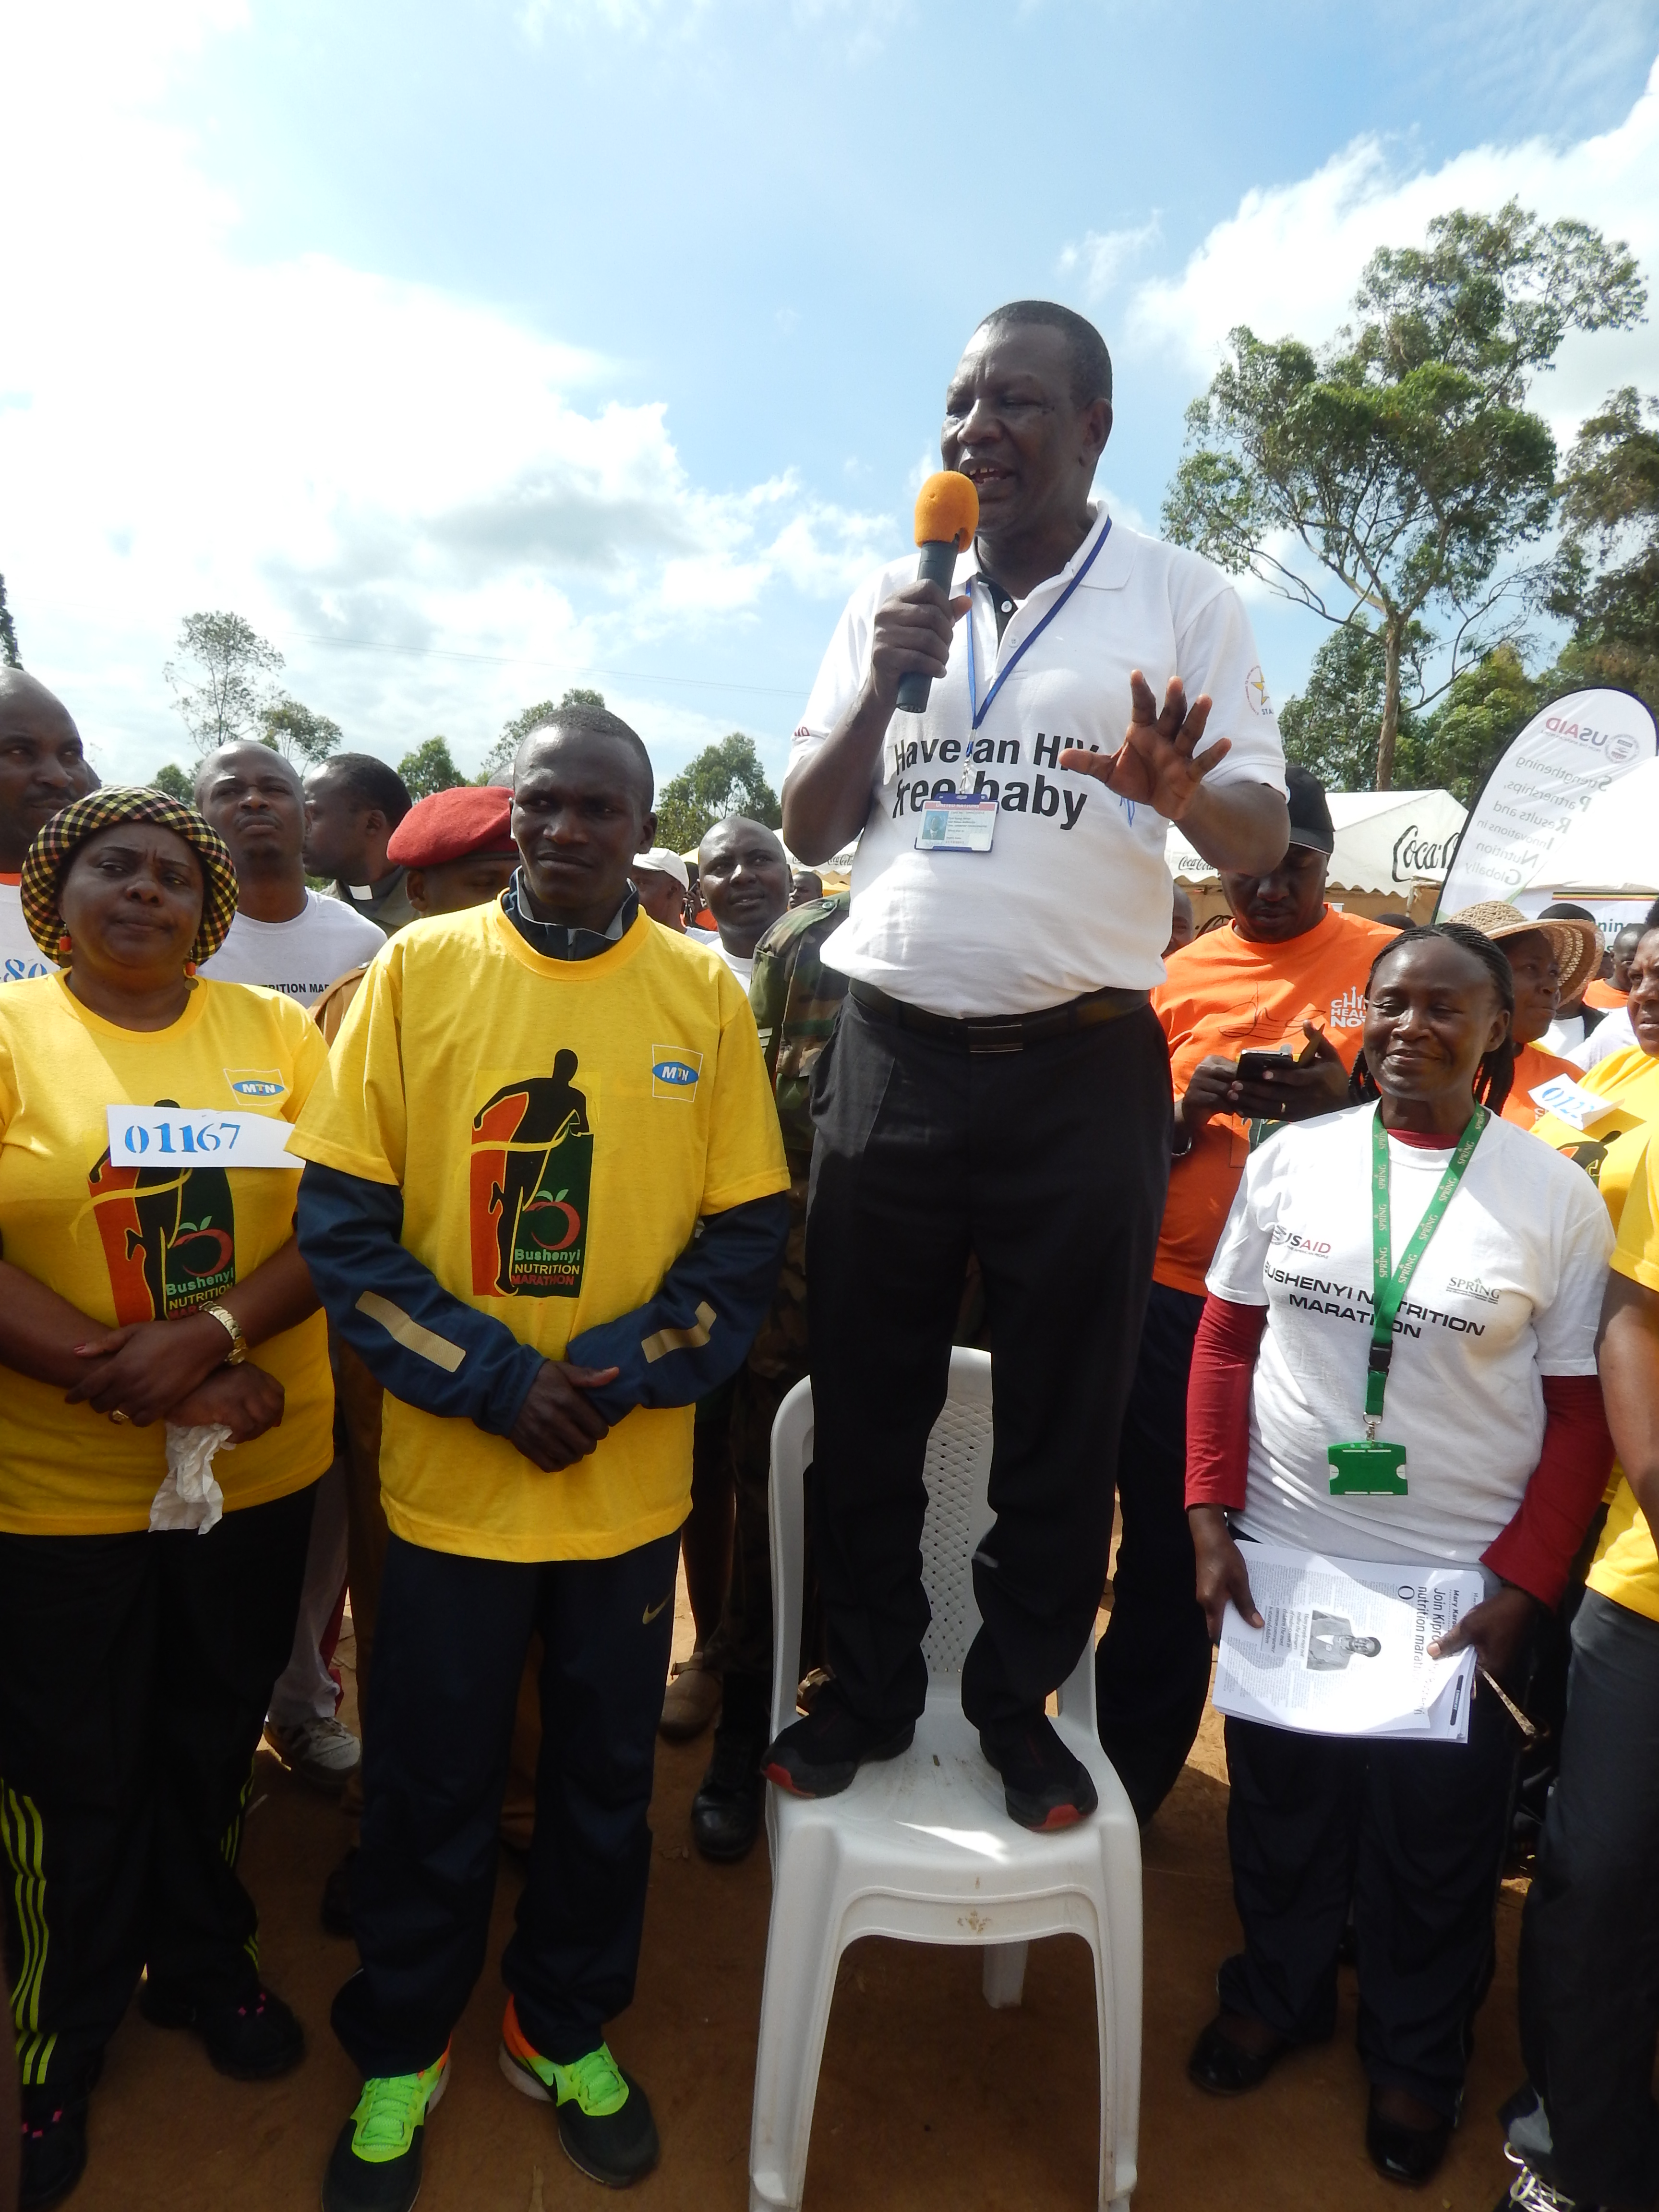 Leaders, including Steven Kiprotich, shared key nutrition messages with the crowds.